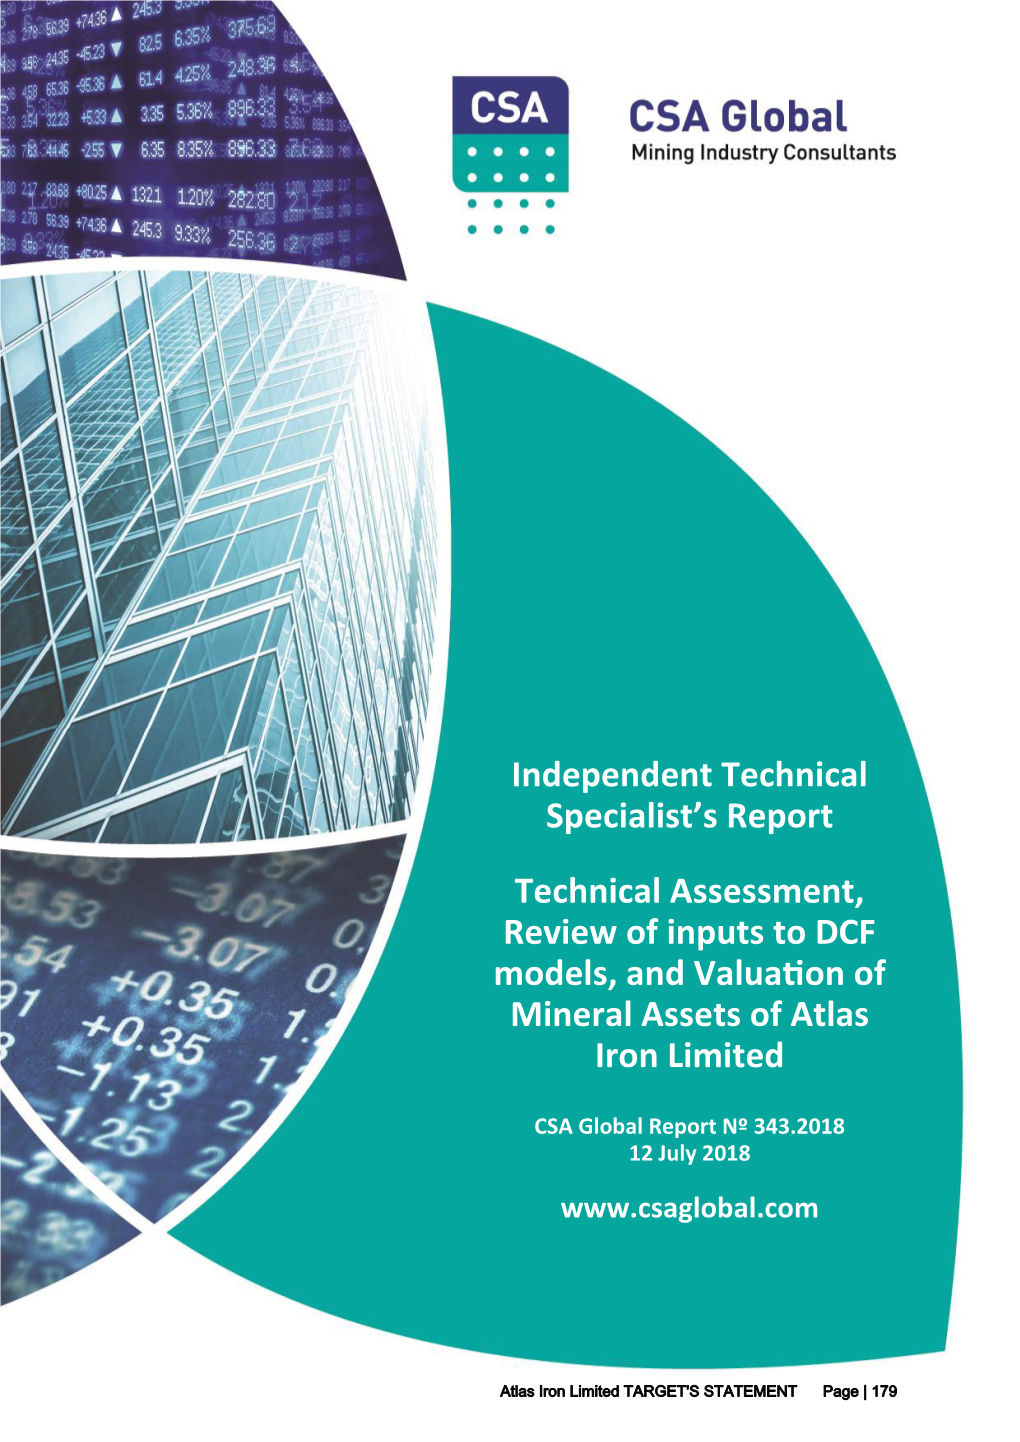 Independent Technical Specialist's Report Technical Assessment